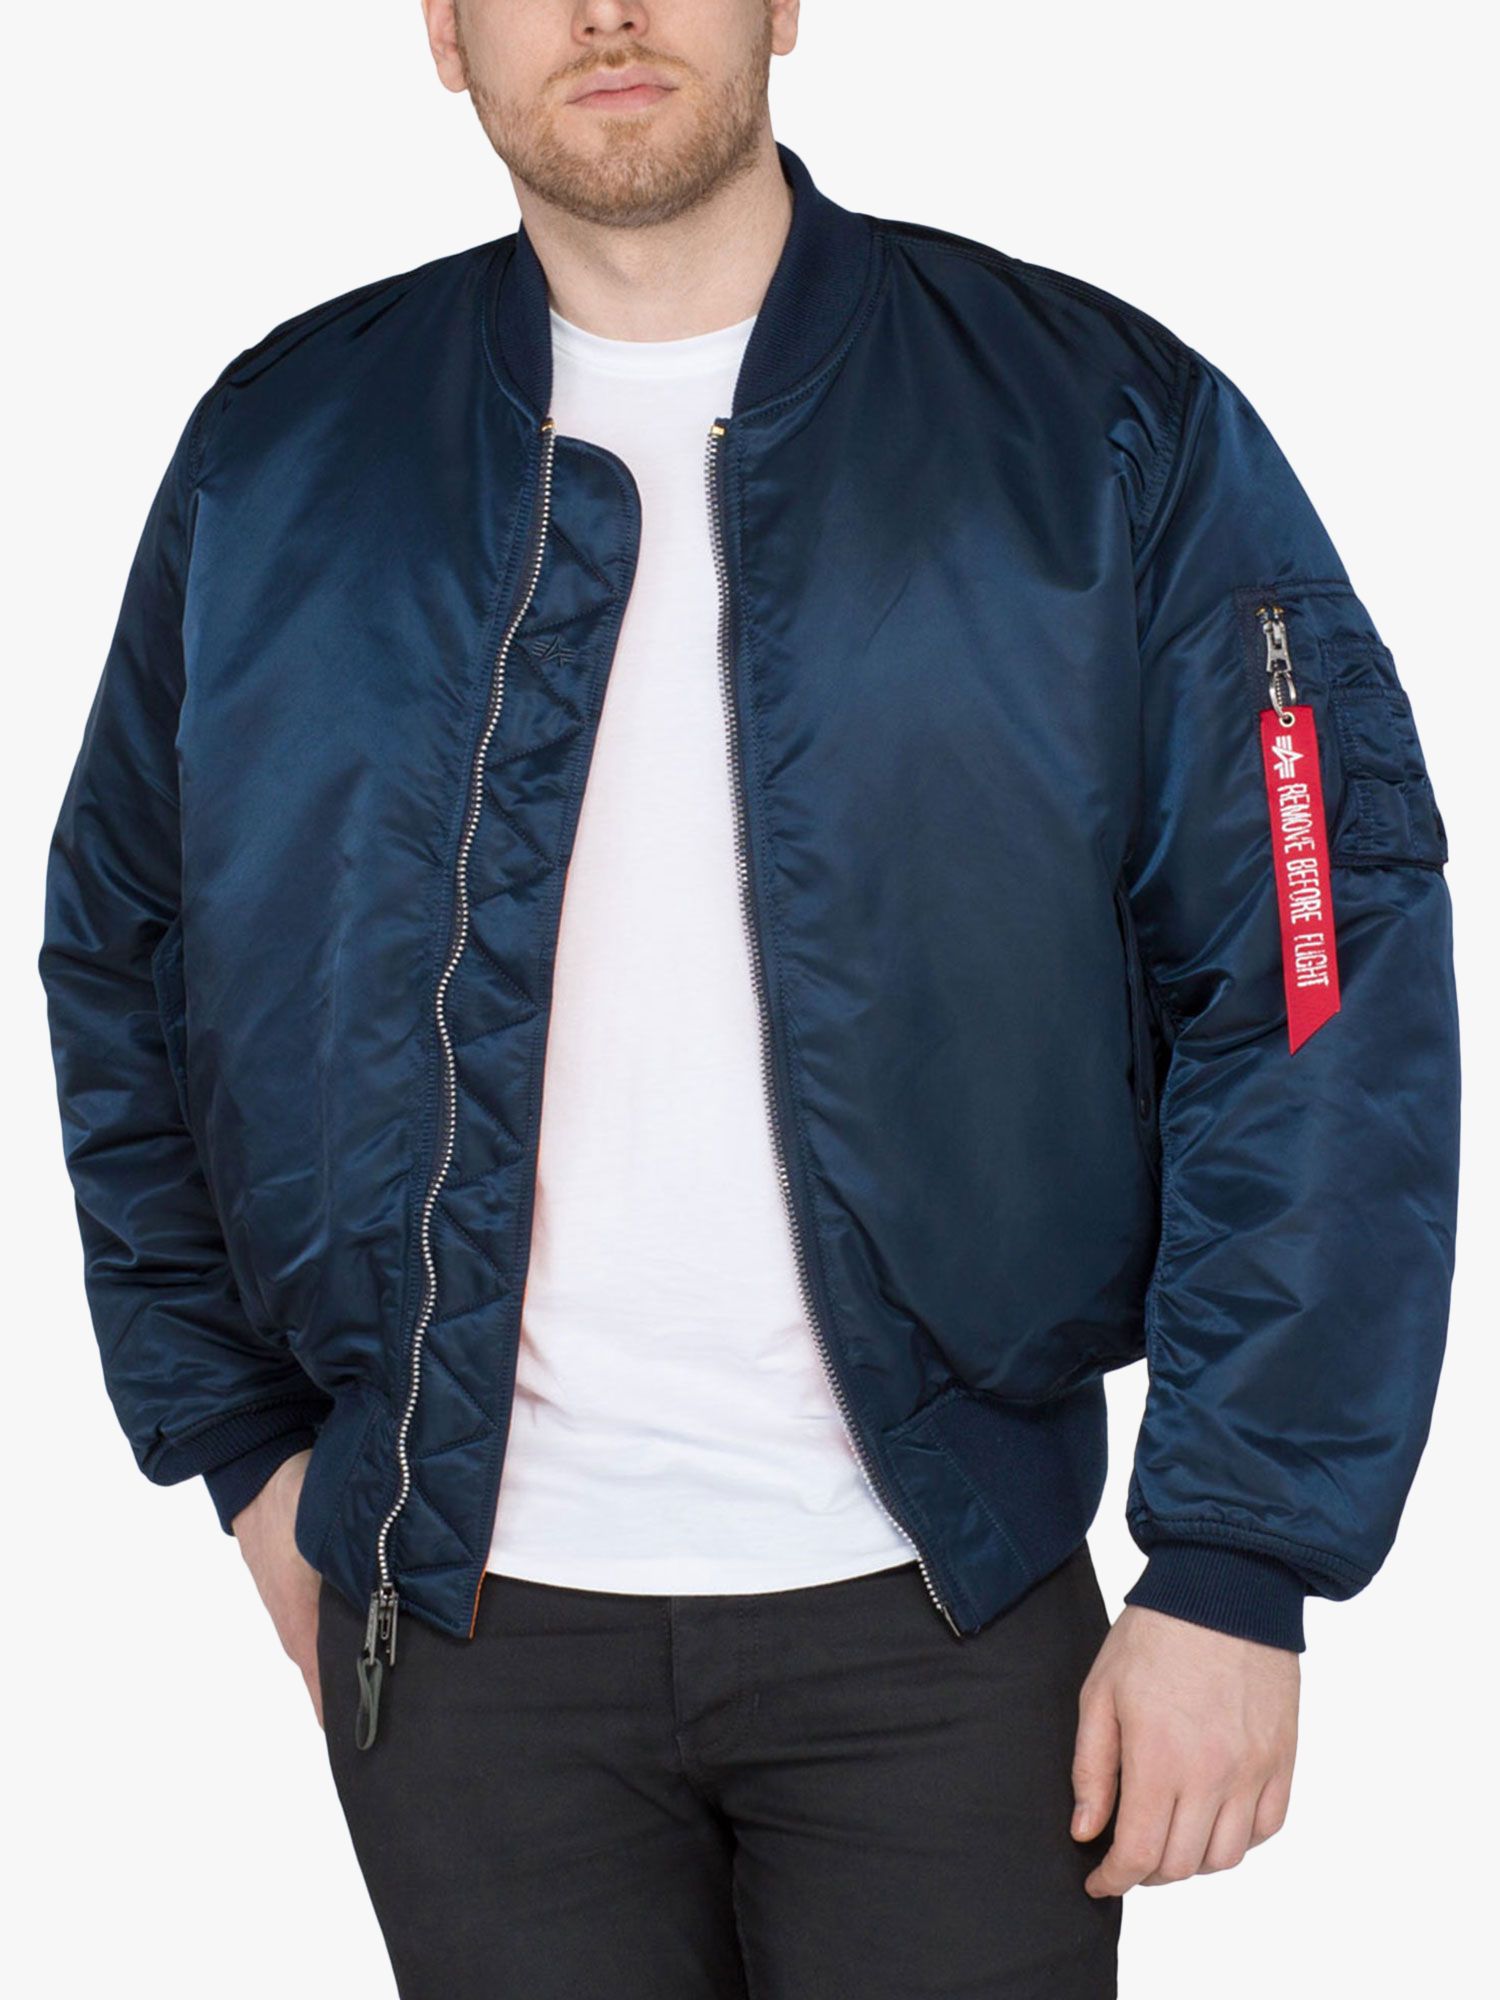 Alpha Industries MA1 Bomber Jacket, Rep Blue, S